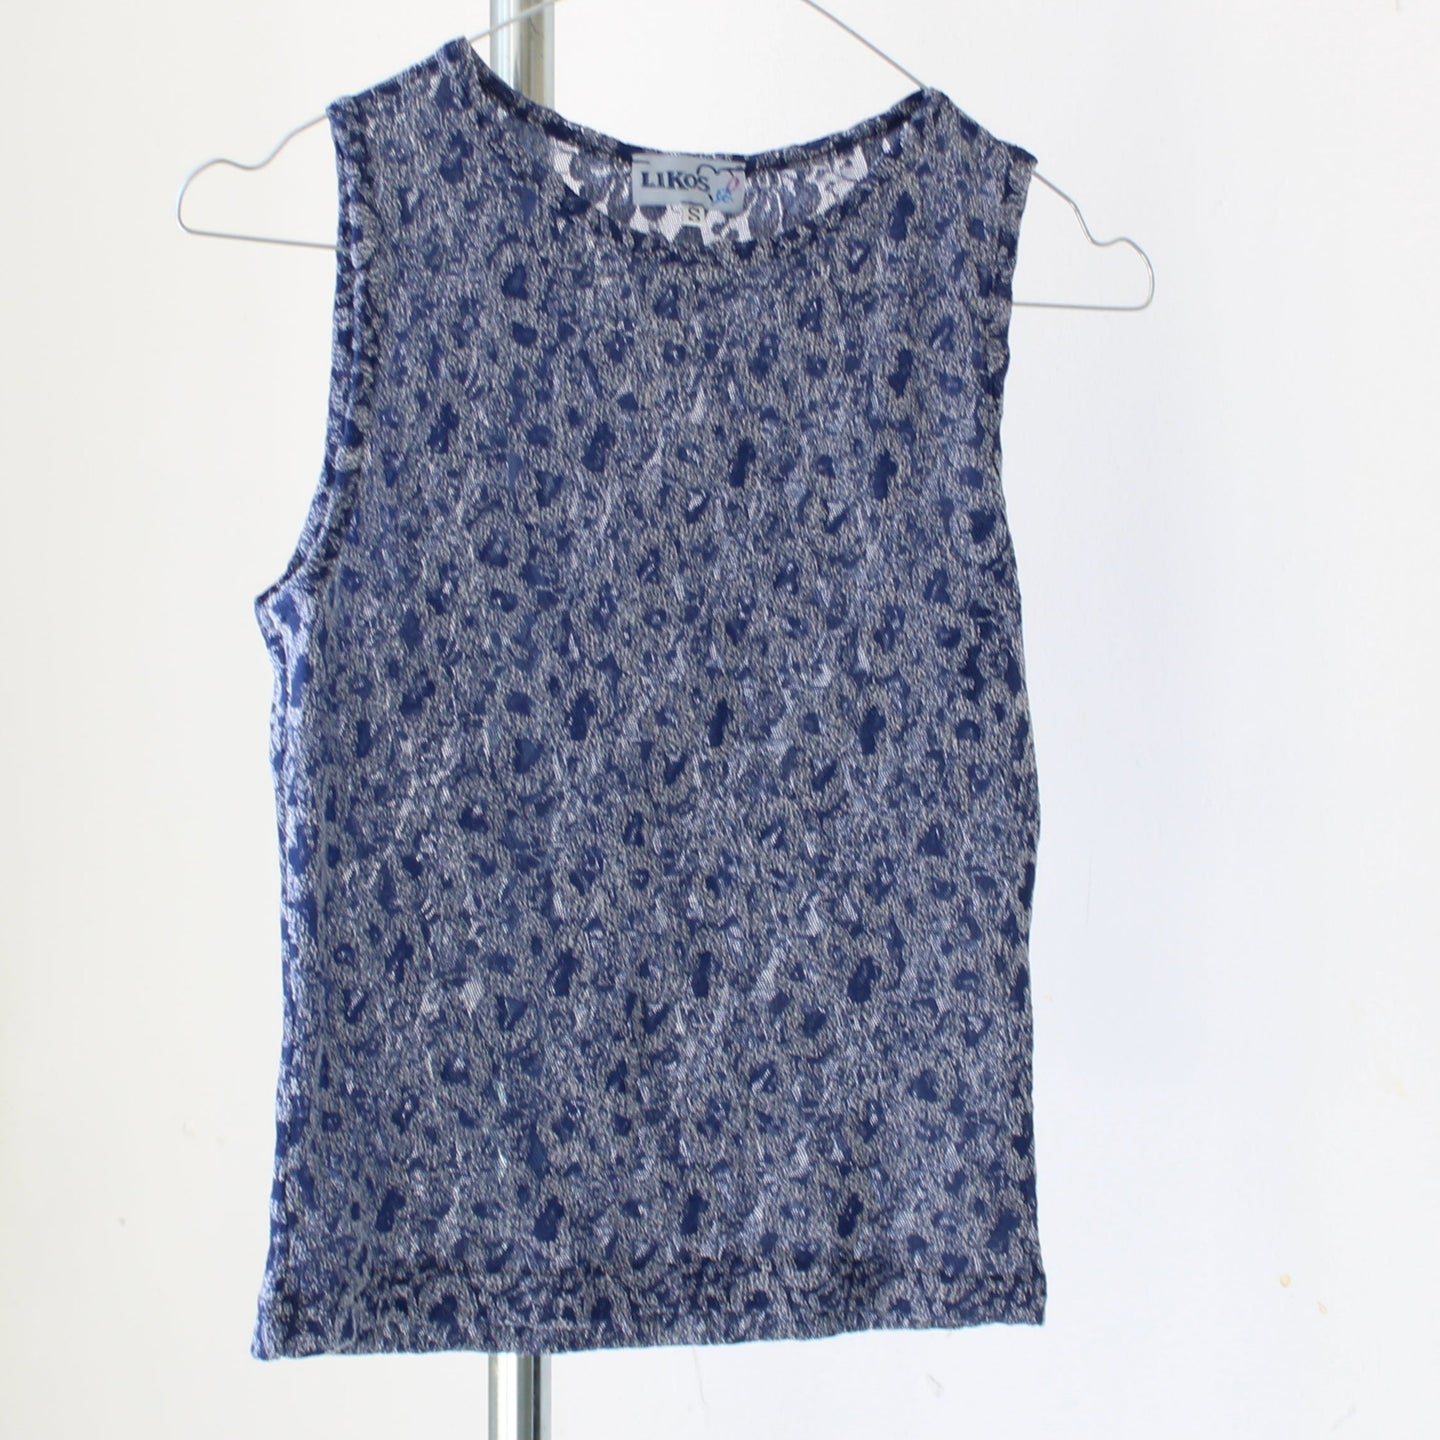 Sheer blue top, size S